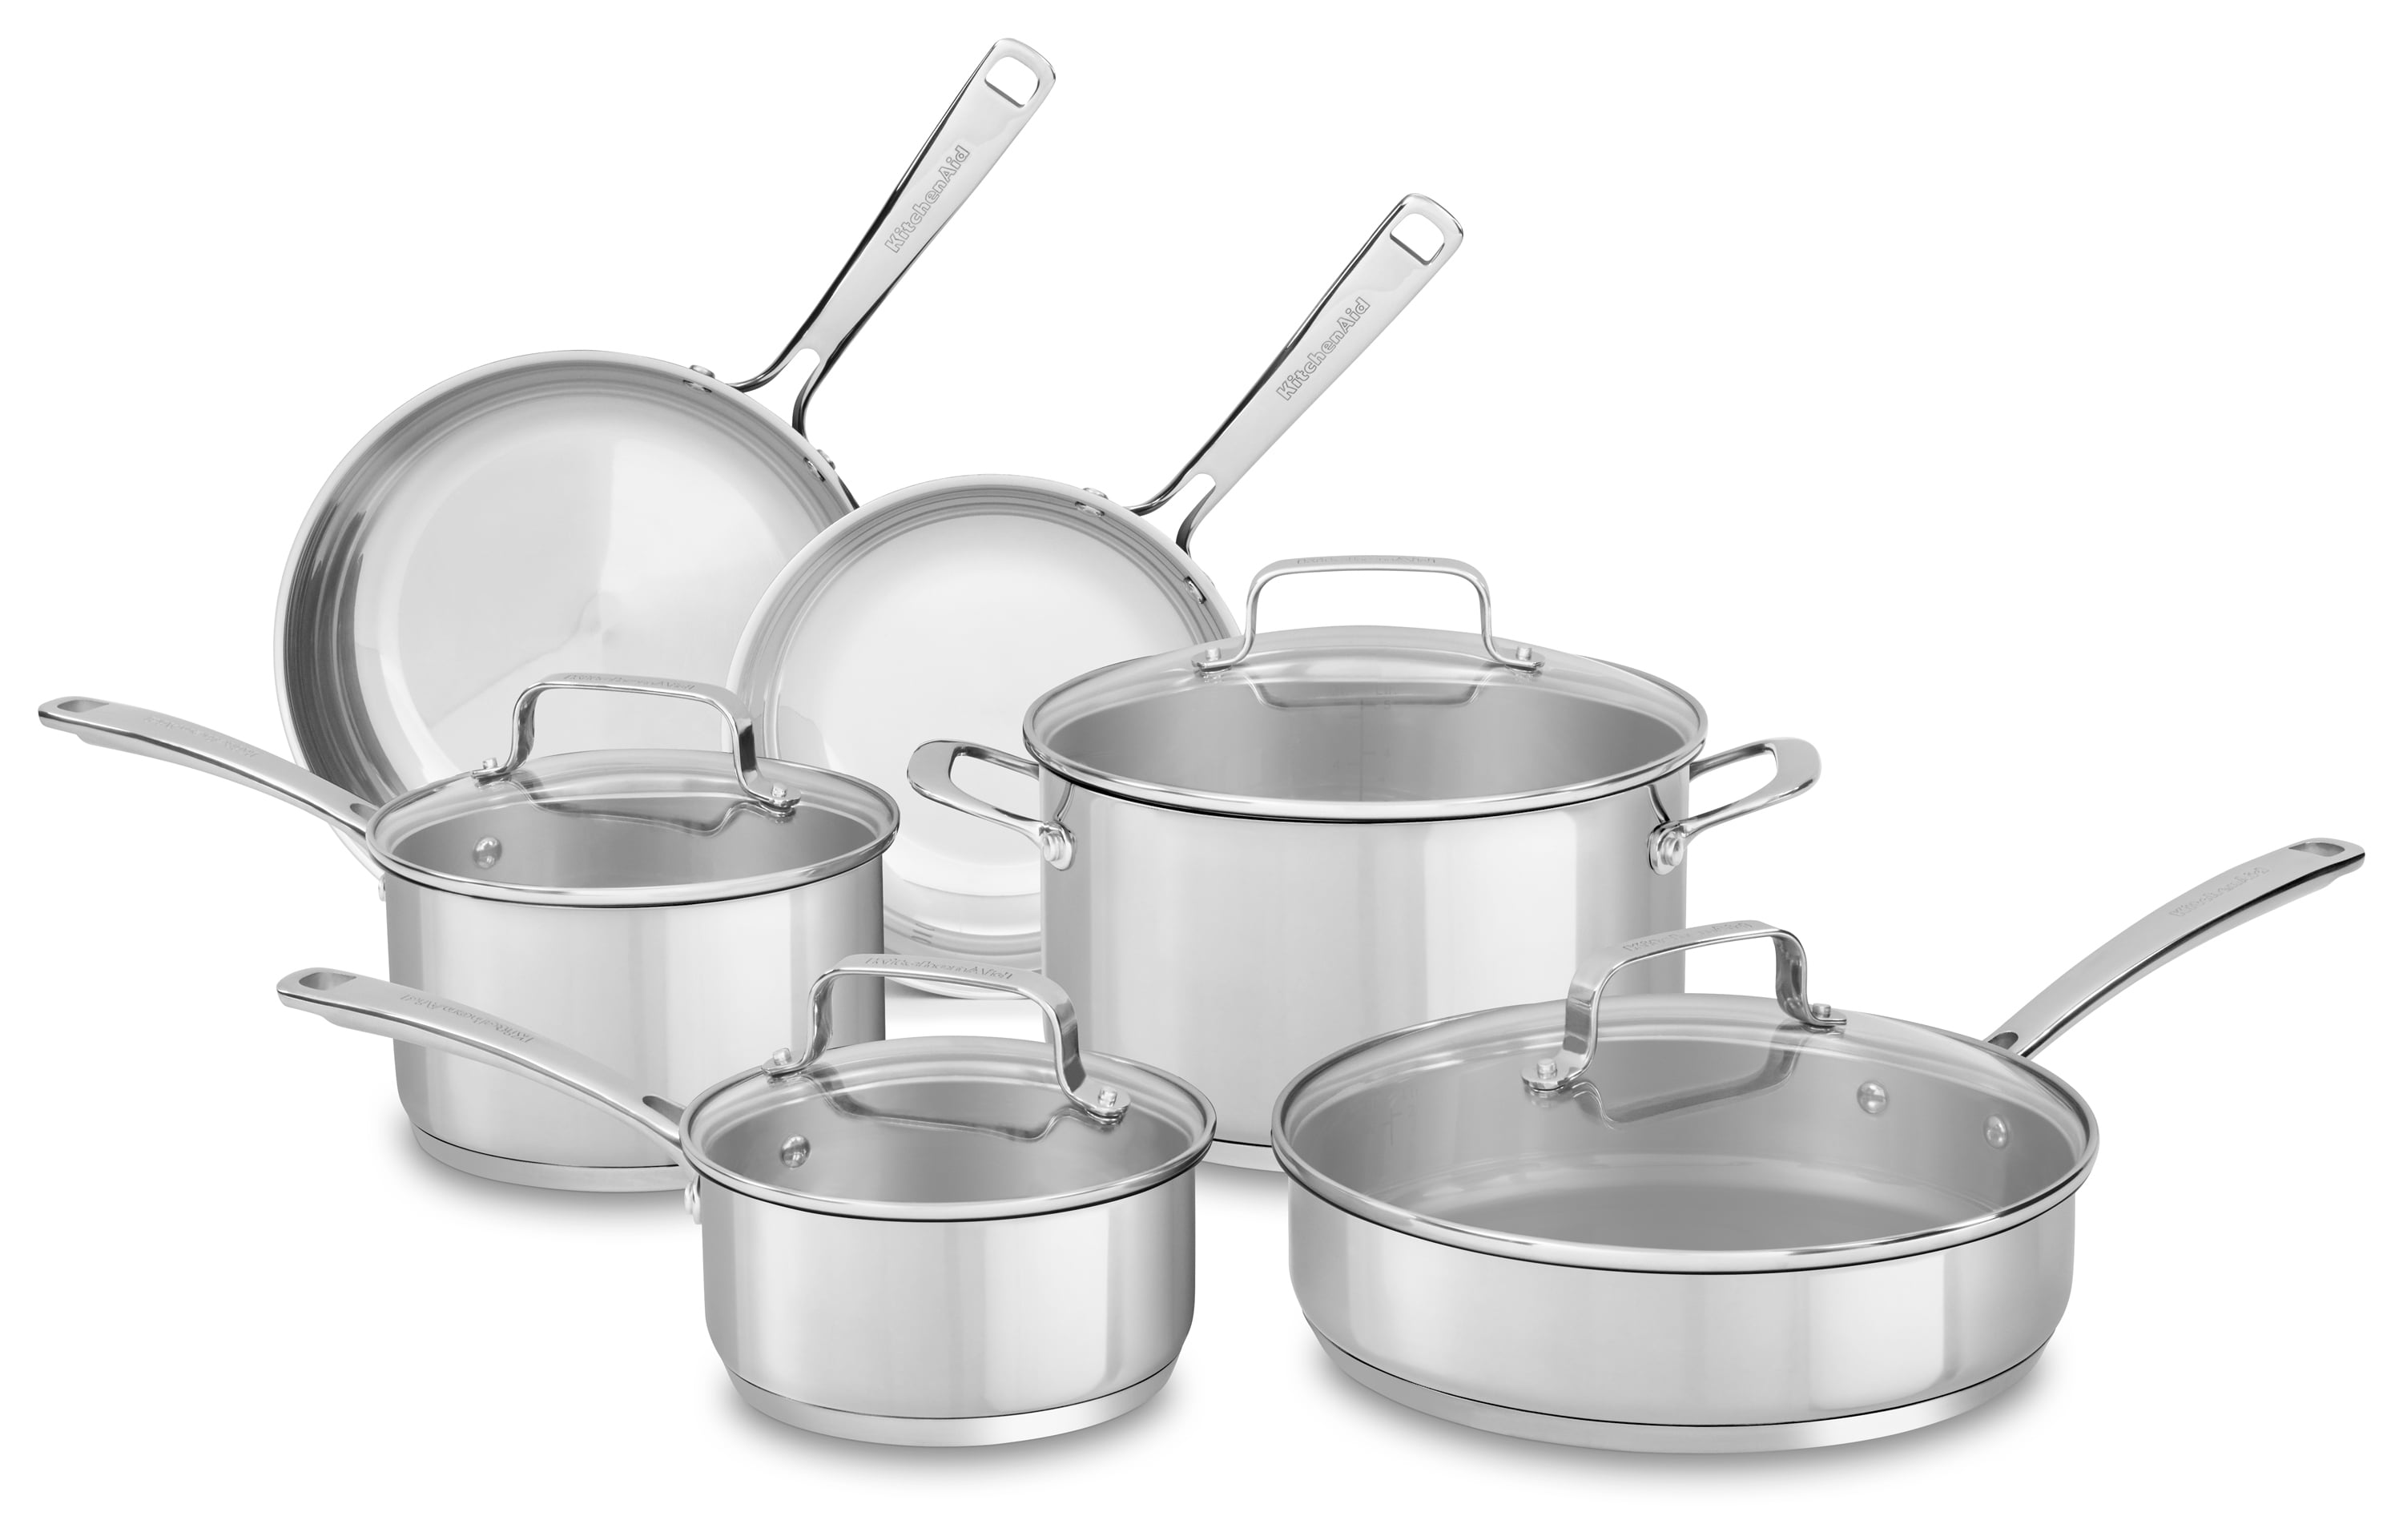 KitchenAid Stainless Steel Cookware Set, 10-Piece, Brushed Stainless Steel  